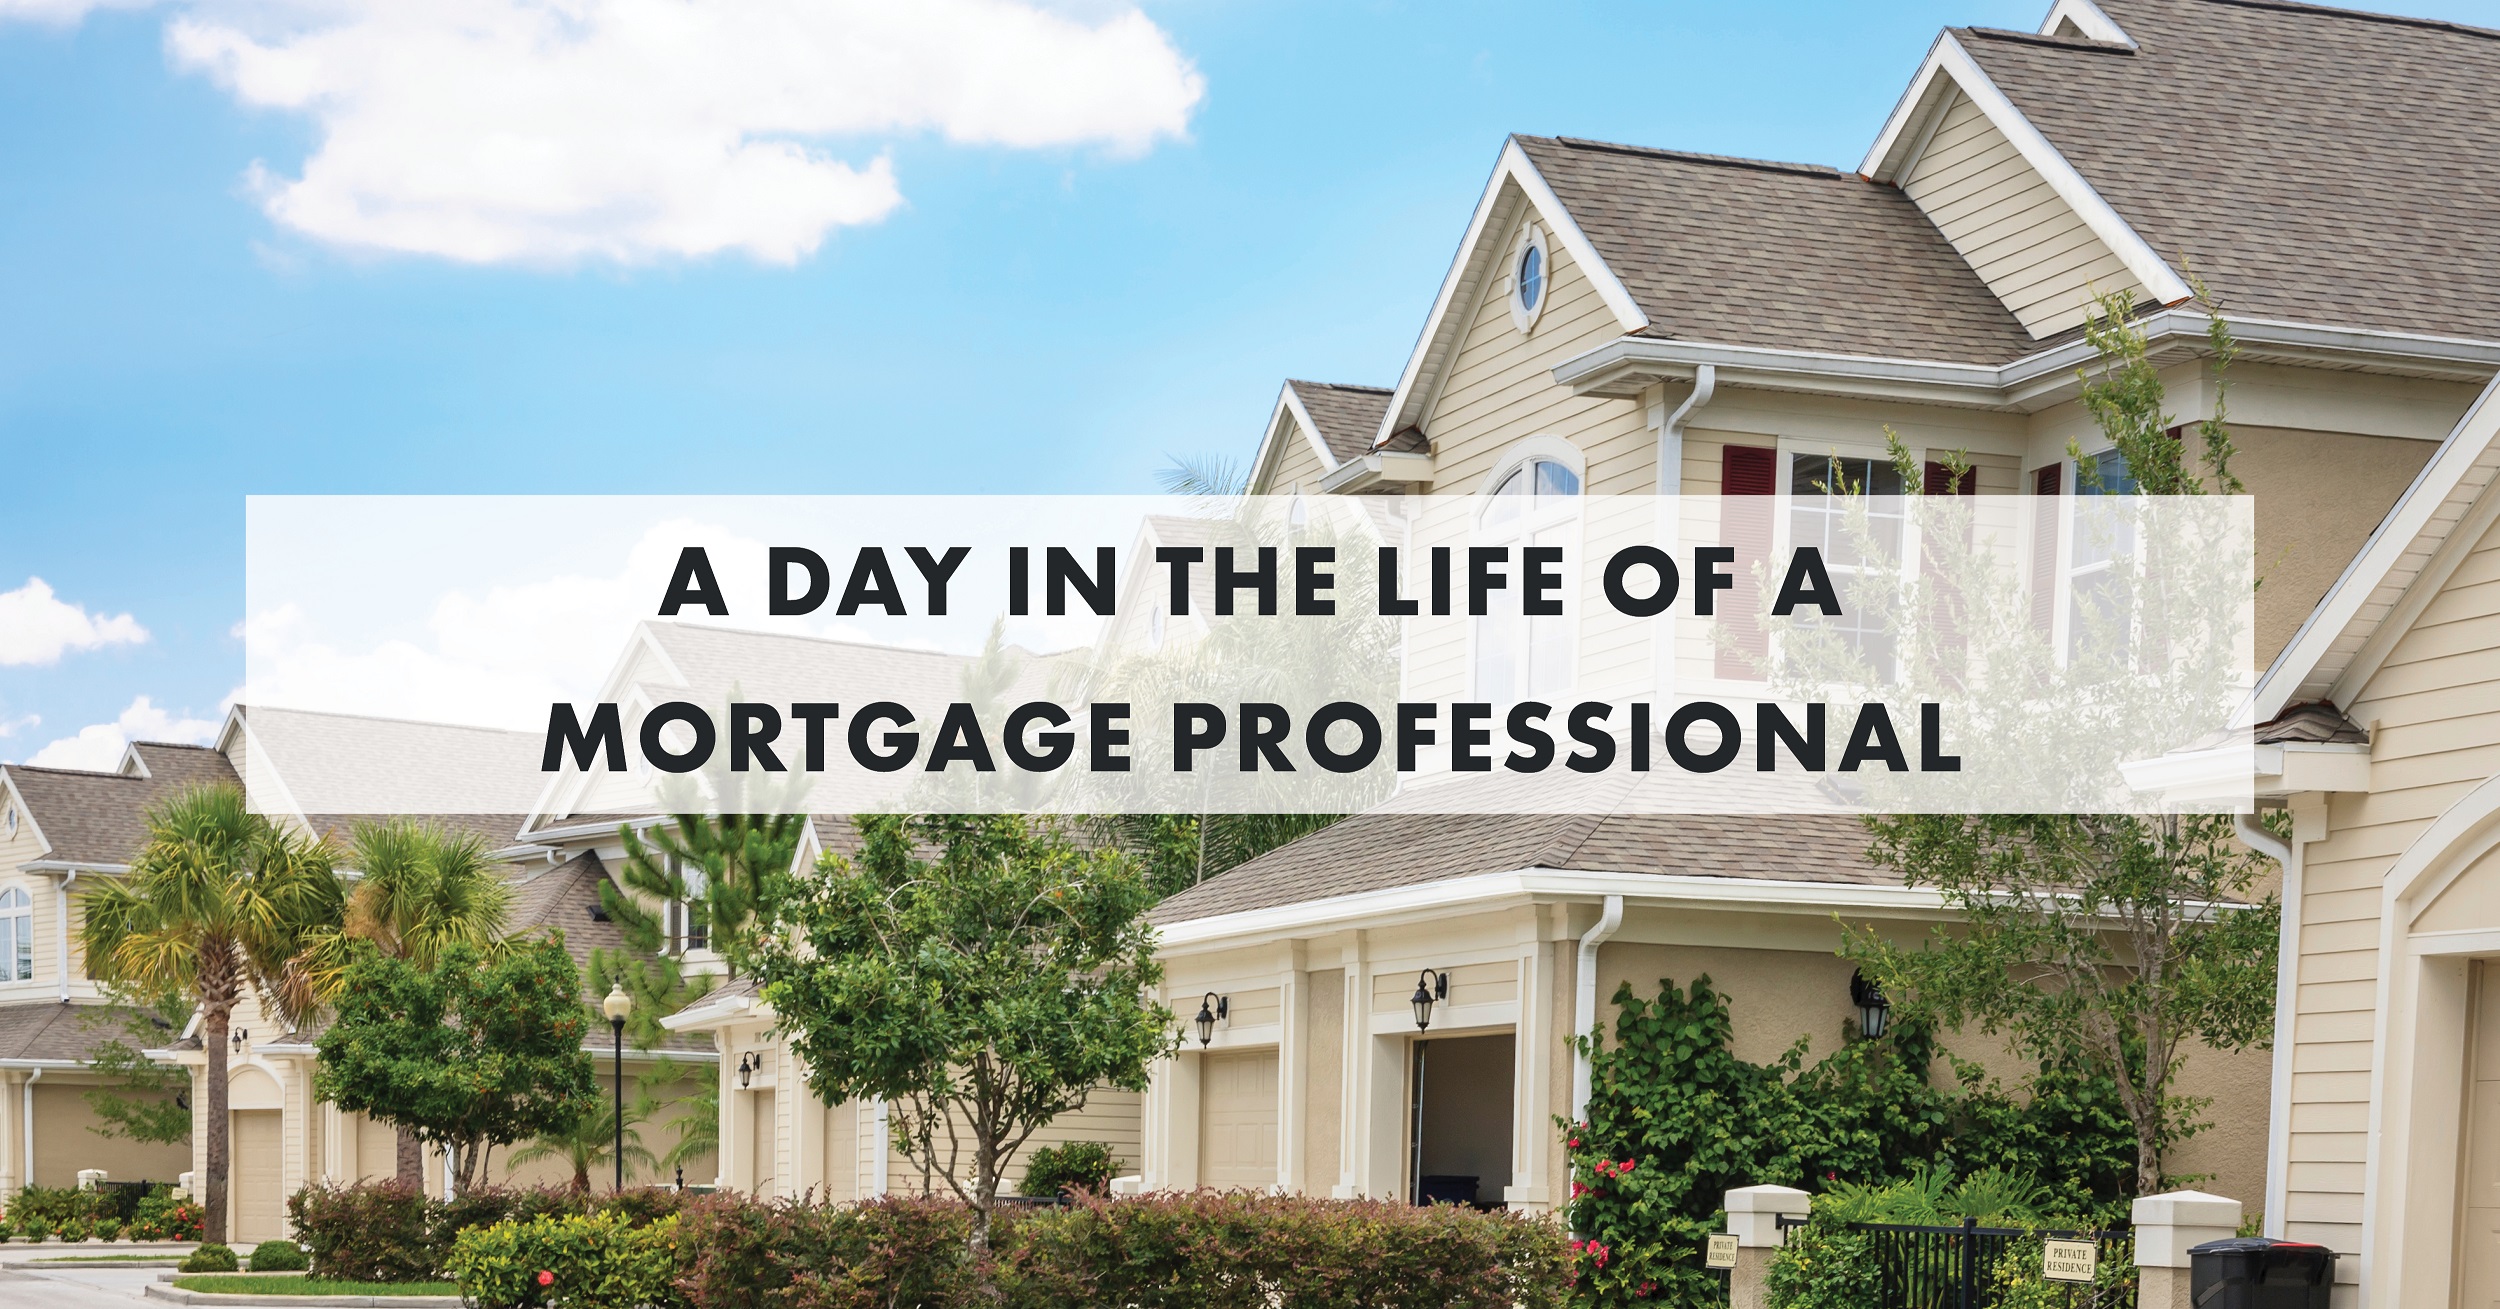 A Day in the Life of a Mortgage Professional